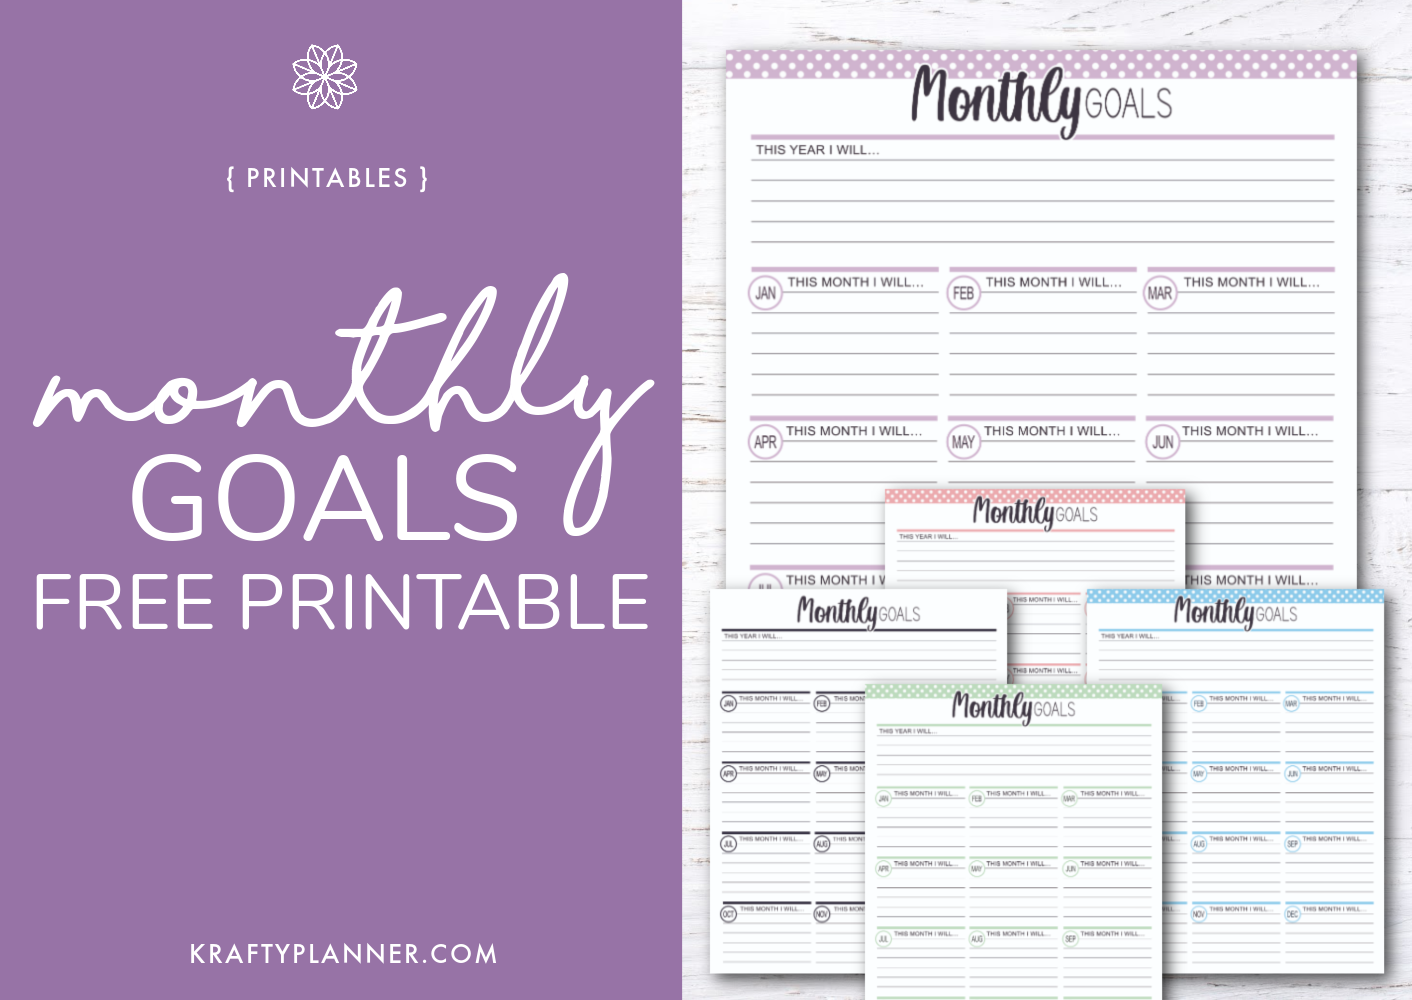 Monthly Goals Free Printable (Day 1)